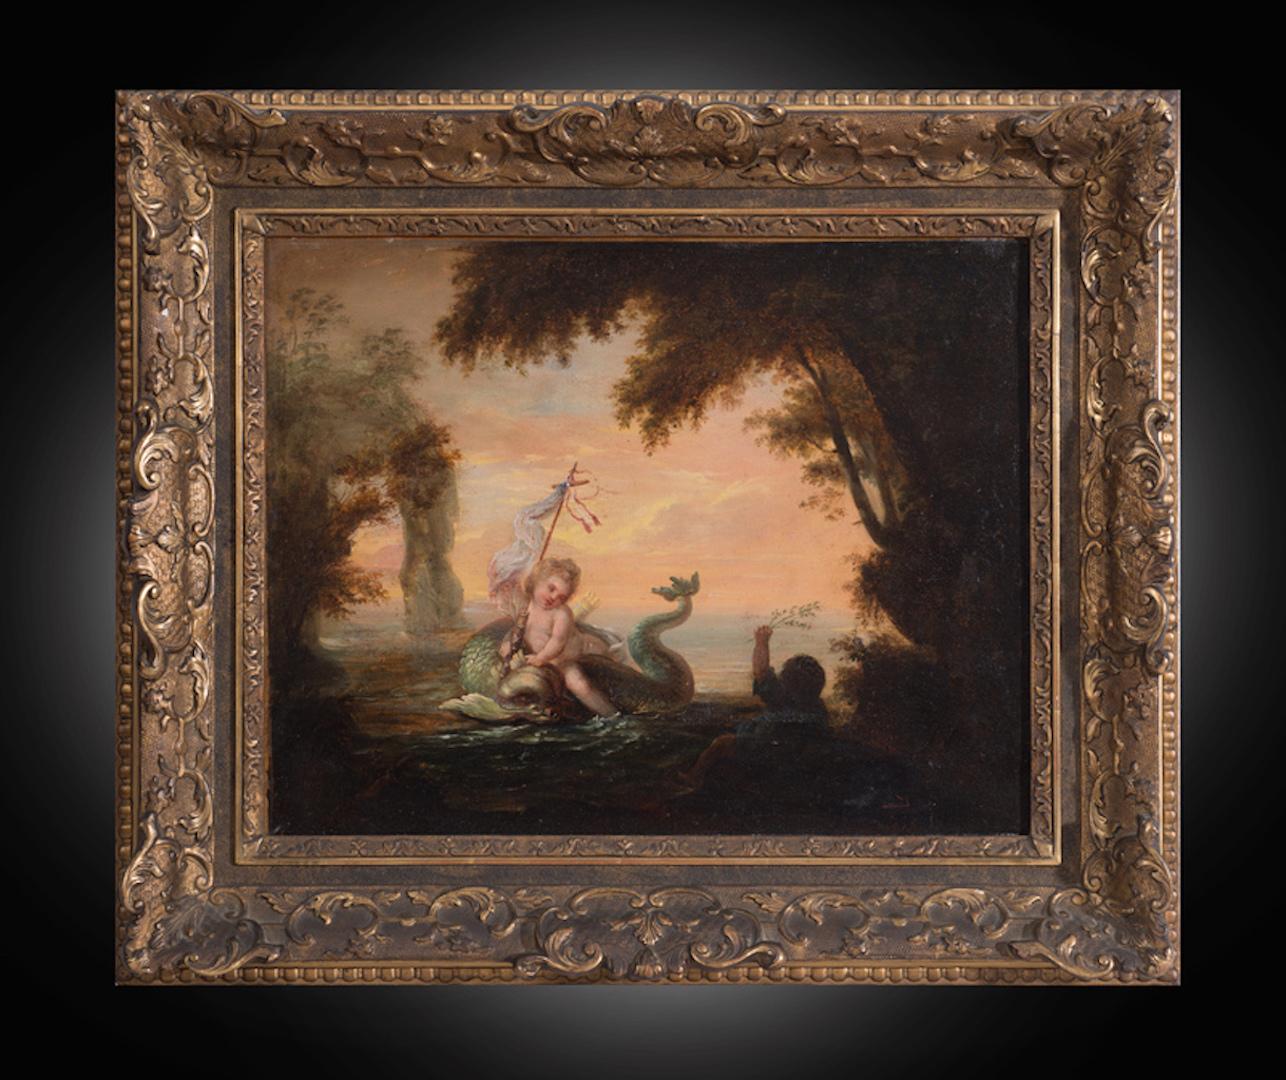 Unknown Figurative Painting - Antique oil on canvas painting Signed and dated 1848.